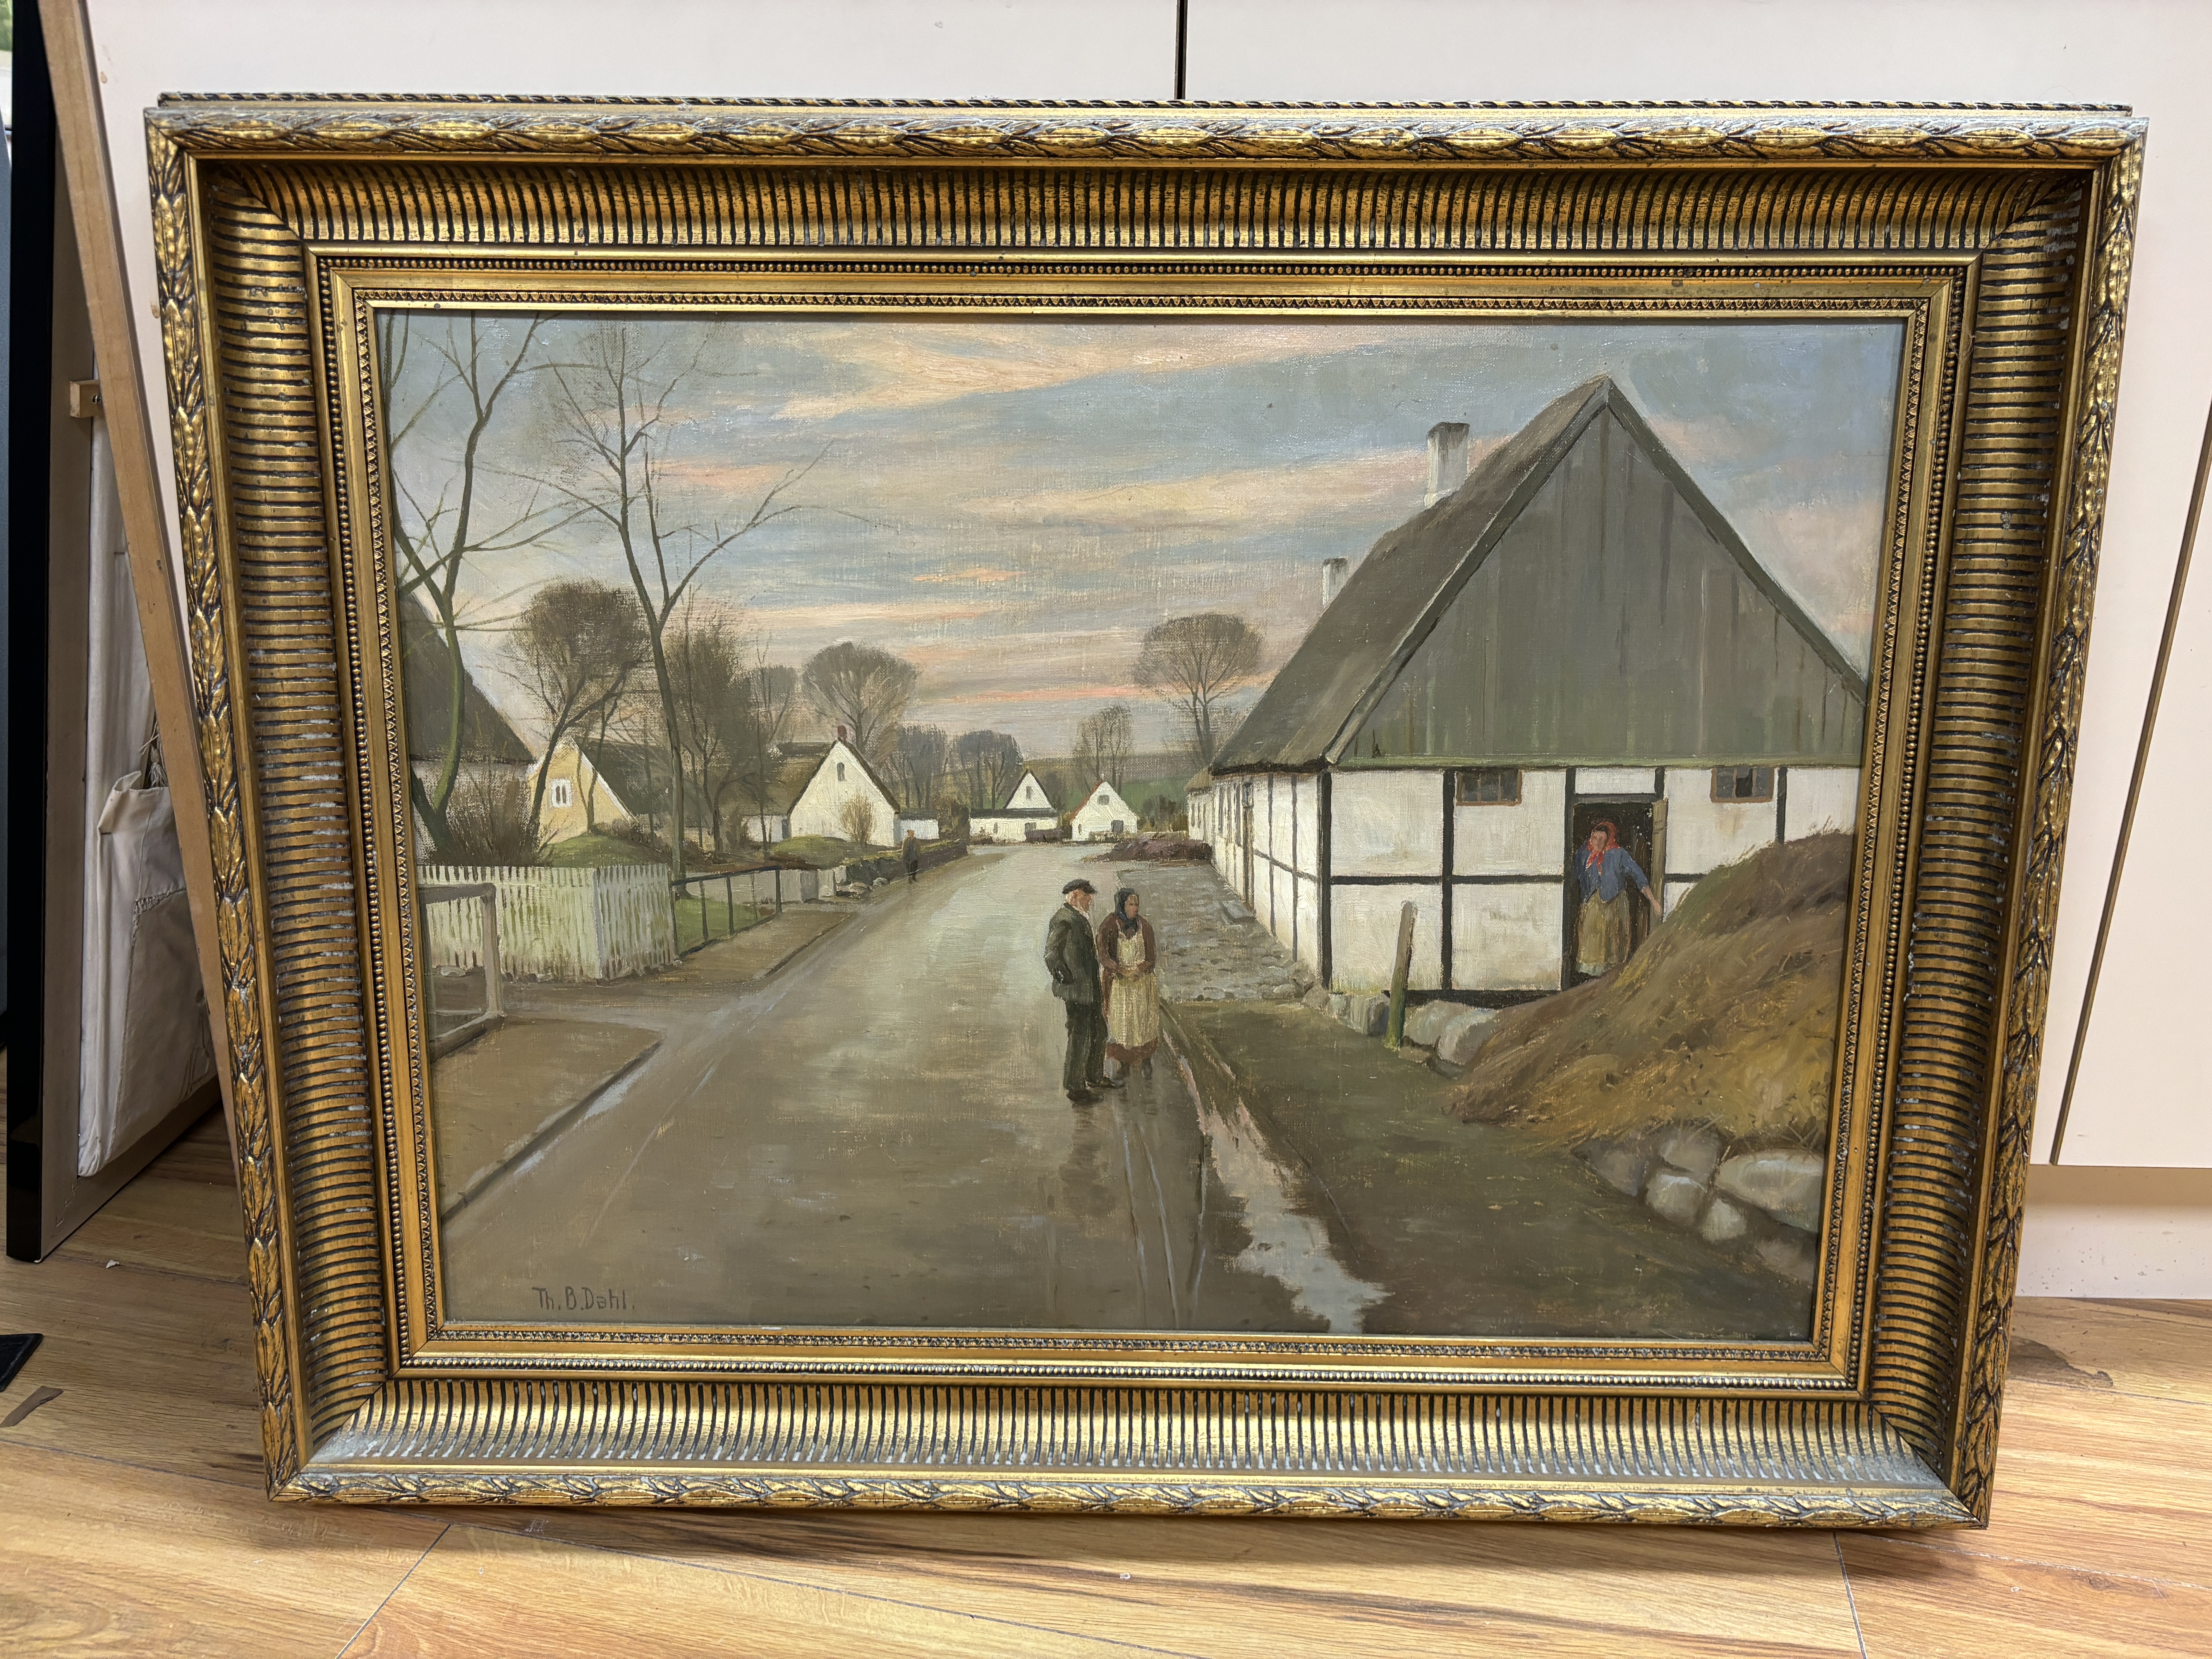 Theodore Dahl (1886-1971), oil on canvas, Street scene with cottages and figures, signed, details verso, ornate gilt framed, 50 x 70cm